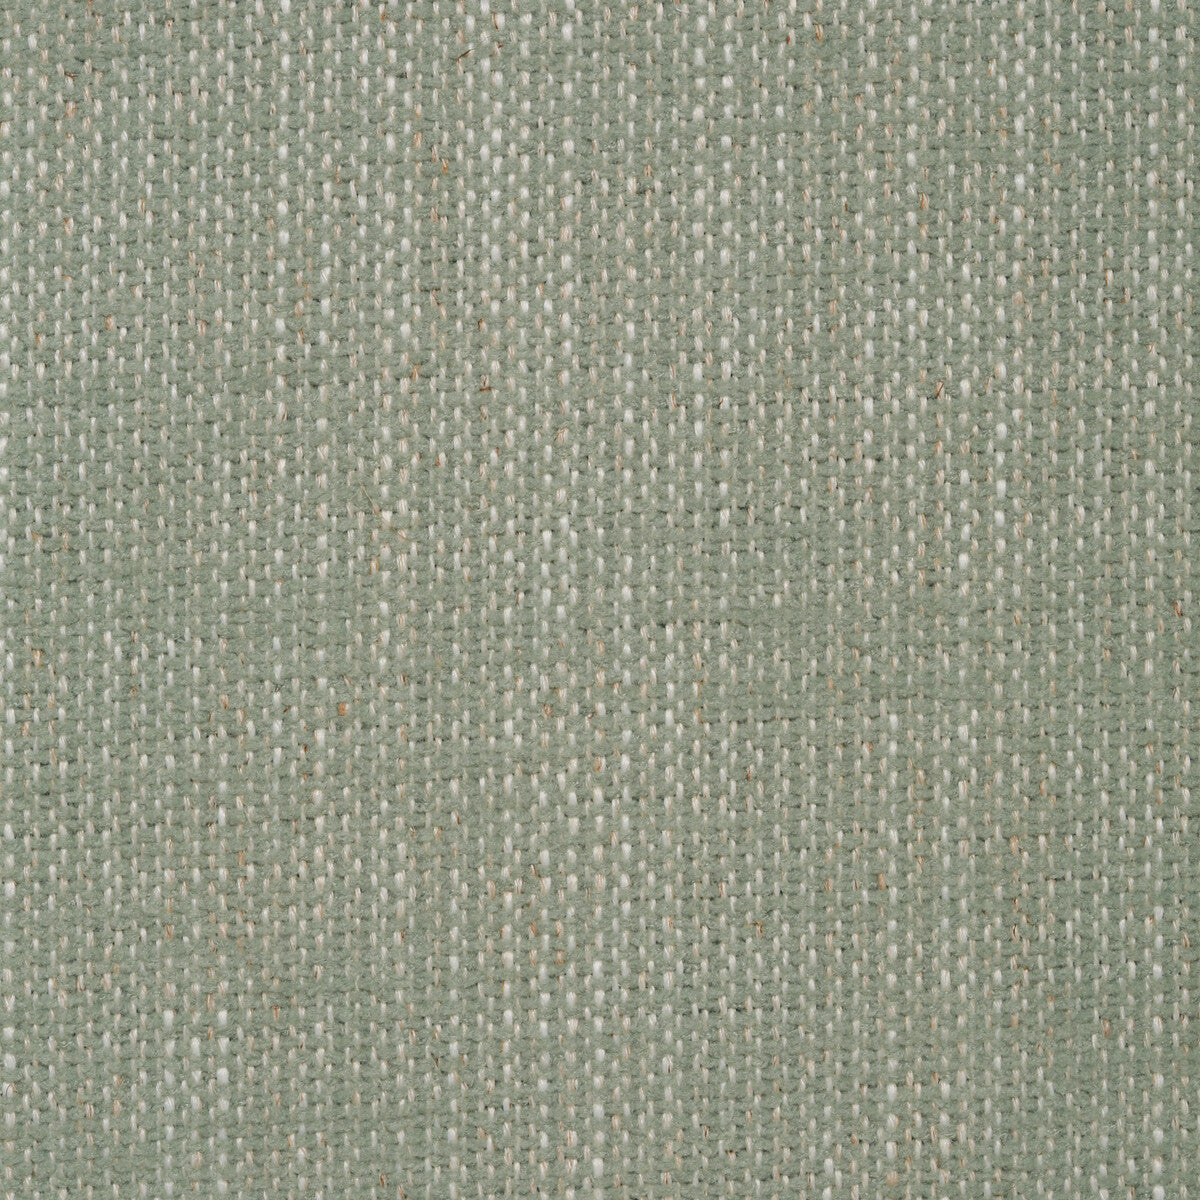 Kravet Smart fabric in 35111-13 color - pattern 35111.13.0 - by Kravet Smart in the Performance Crypton Home collection